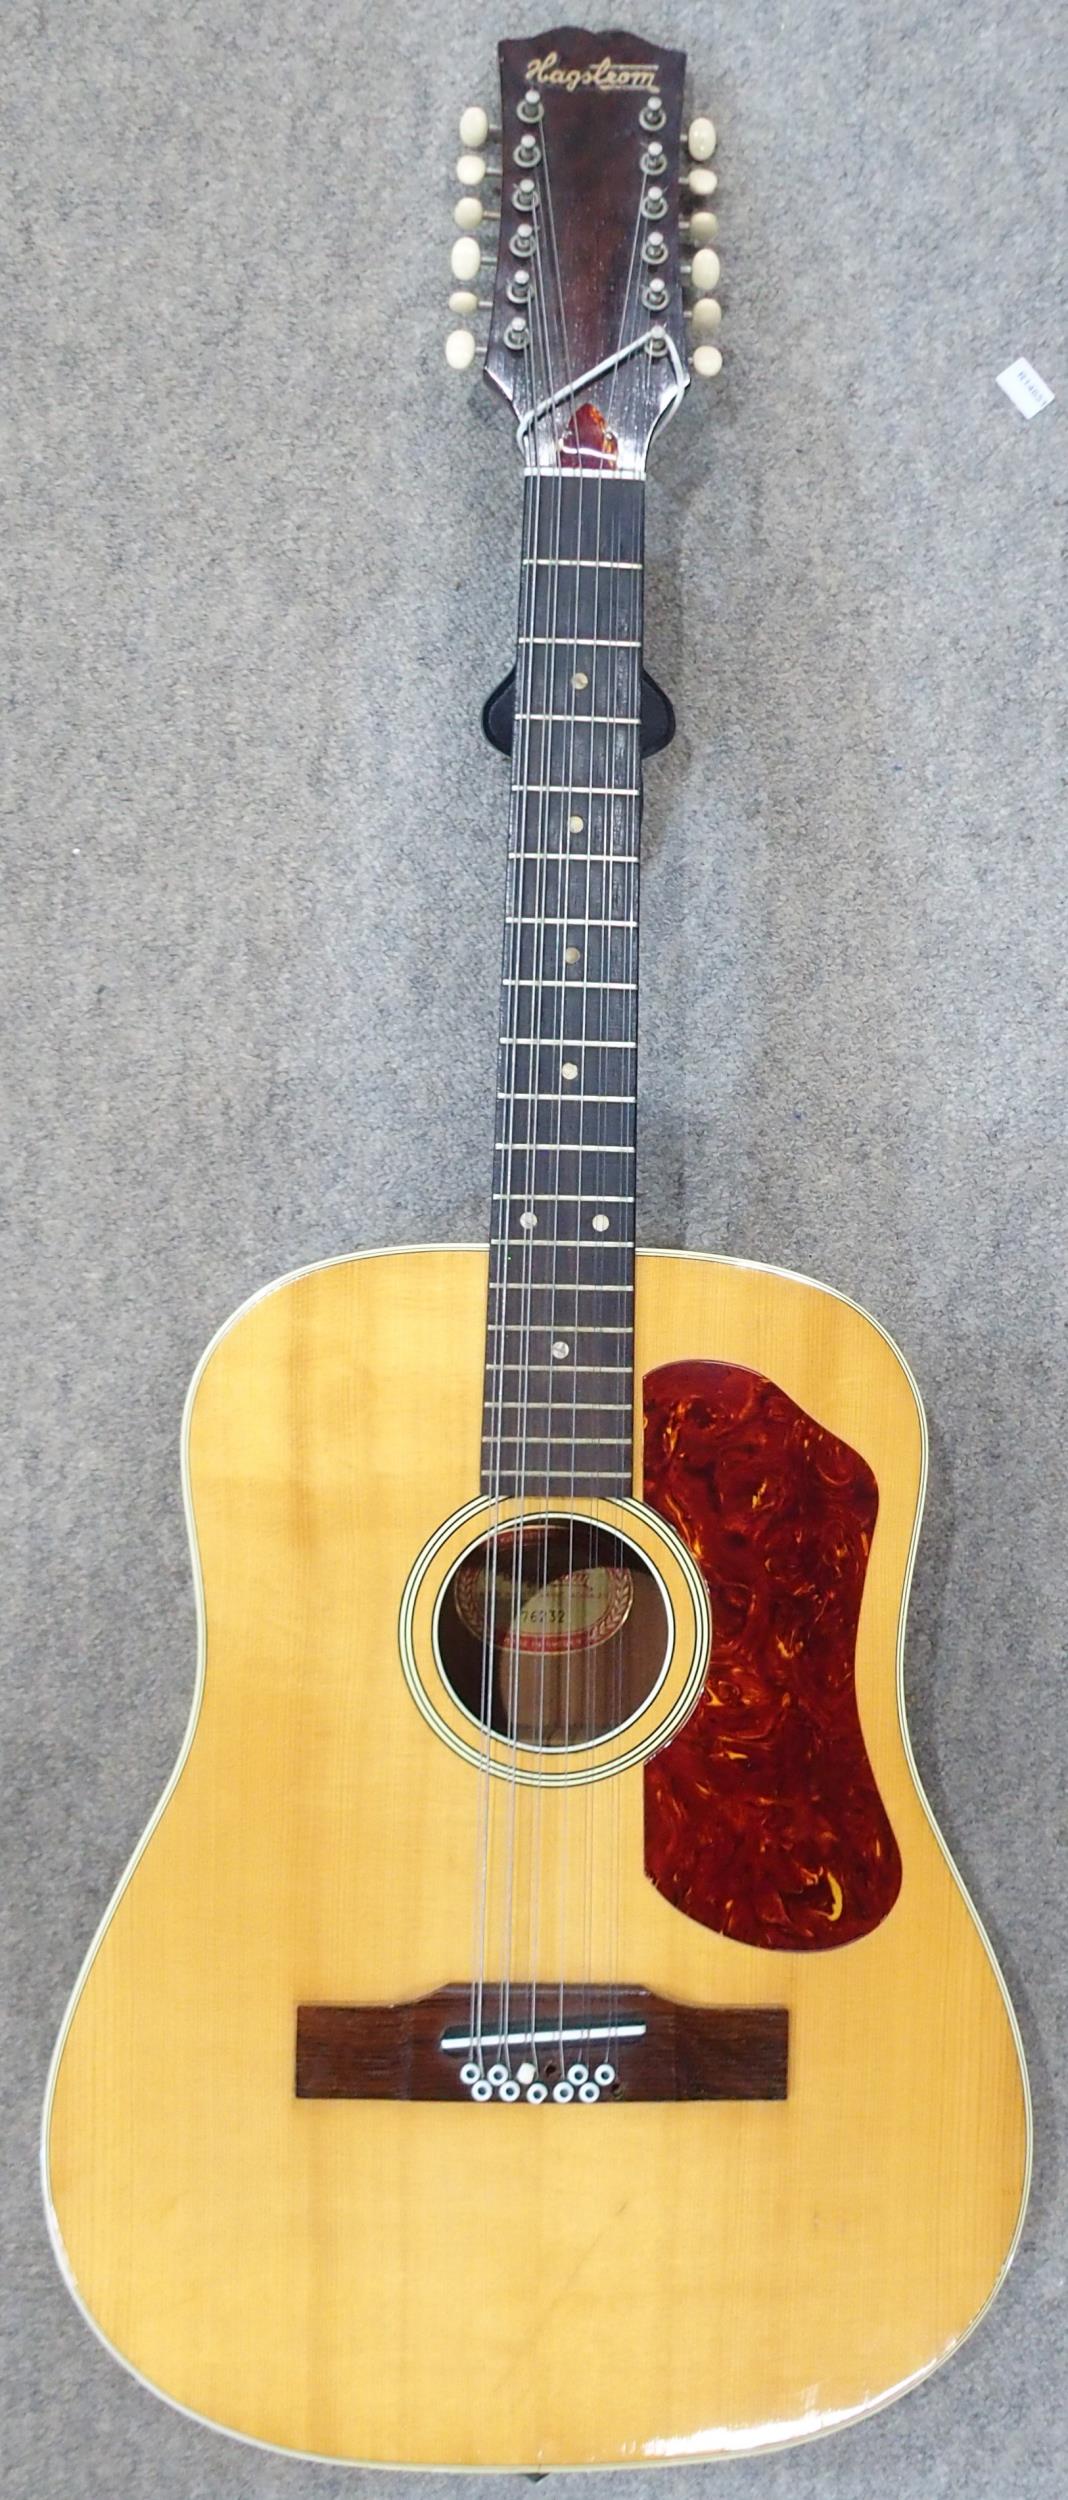 HAGSTROM a vintage 1960's twelve string acoustic guitar by Hagstrom Sweden serial number 76232, 18 - Image 7 of 7